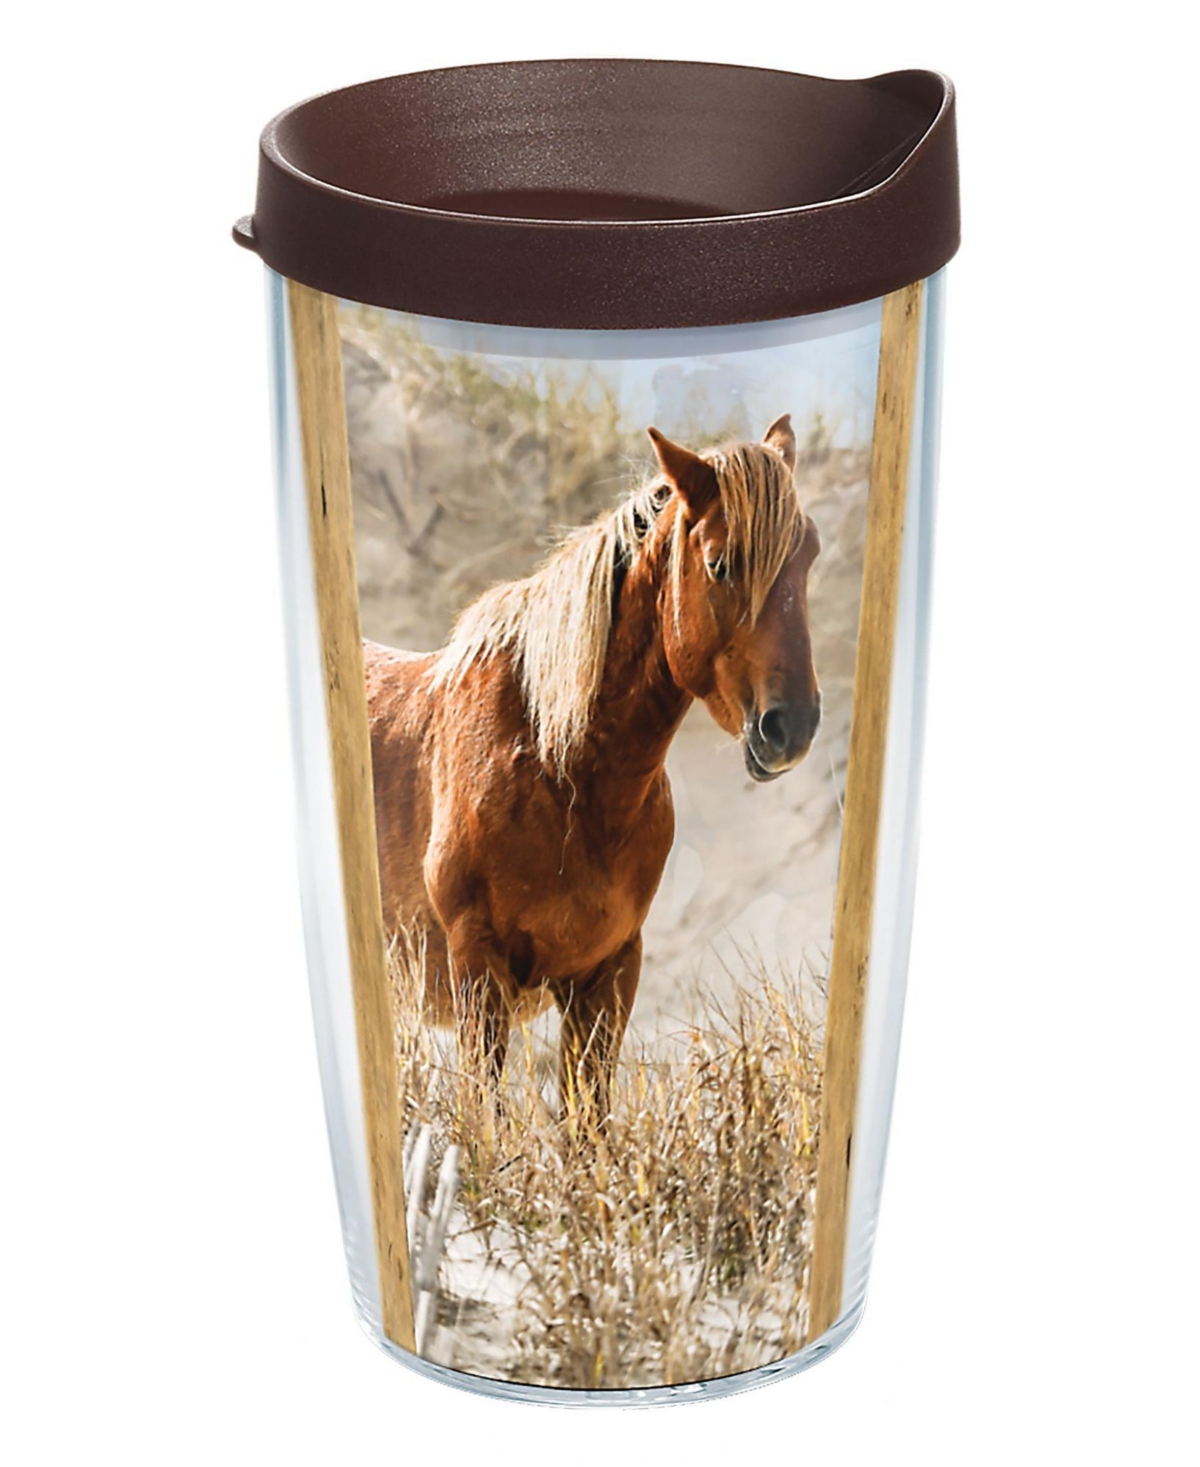 Tervis Tumbler Tervis Coastal Wild Horses Made In Usa Double Walled Insulated Tumbler Travel Cup Keeps Drinks Cold  In Open Miscellaneous